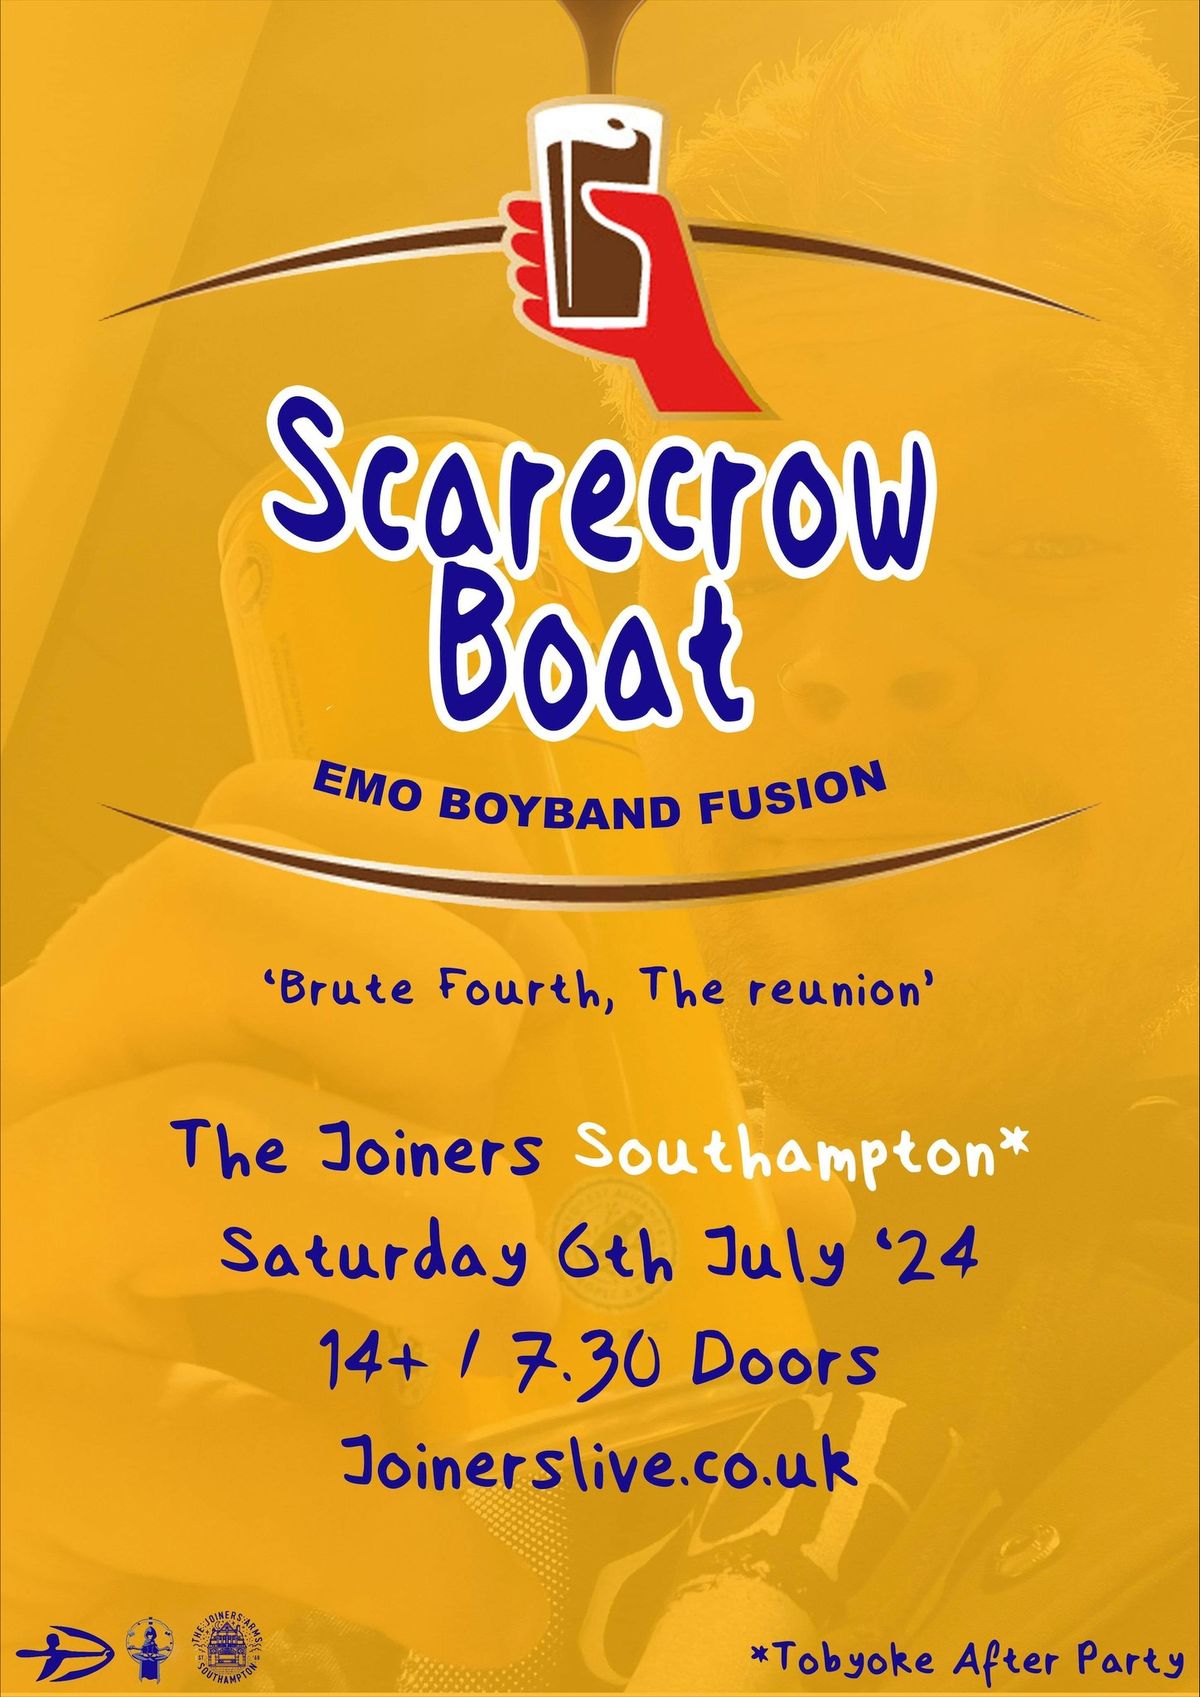 Scarecrow Boat at The Joiners, Southampton